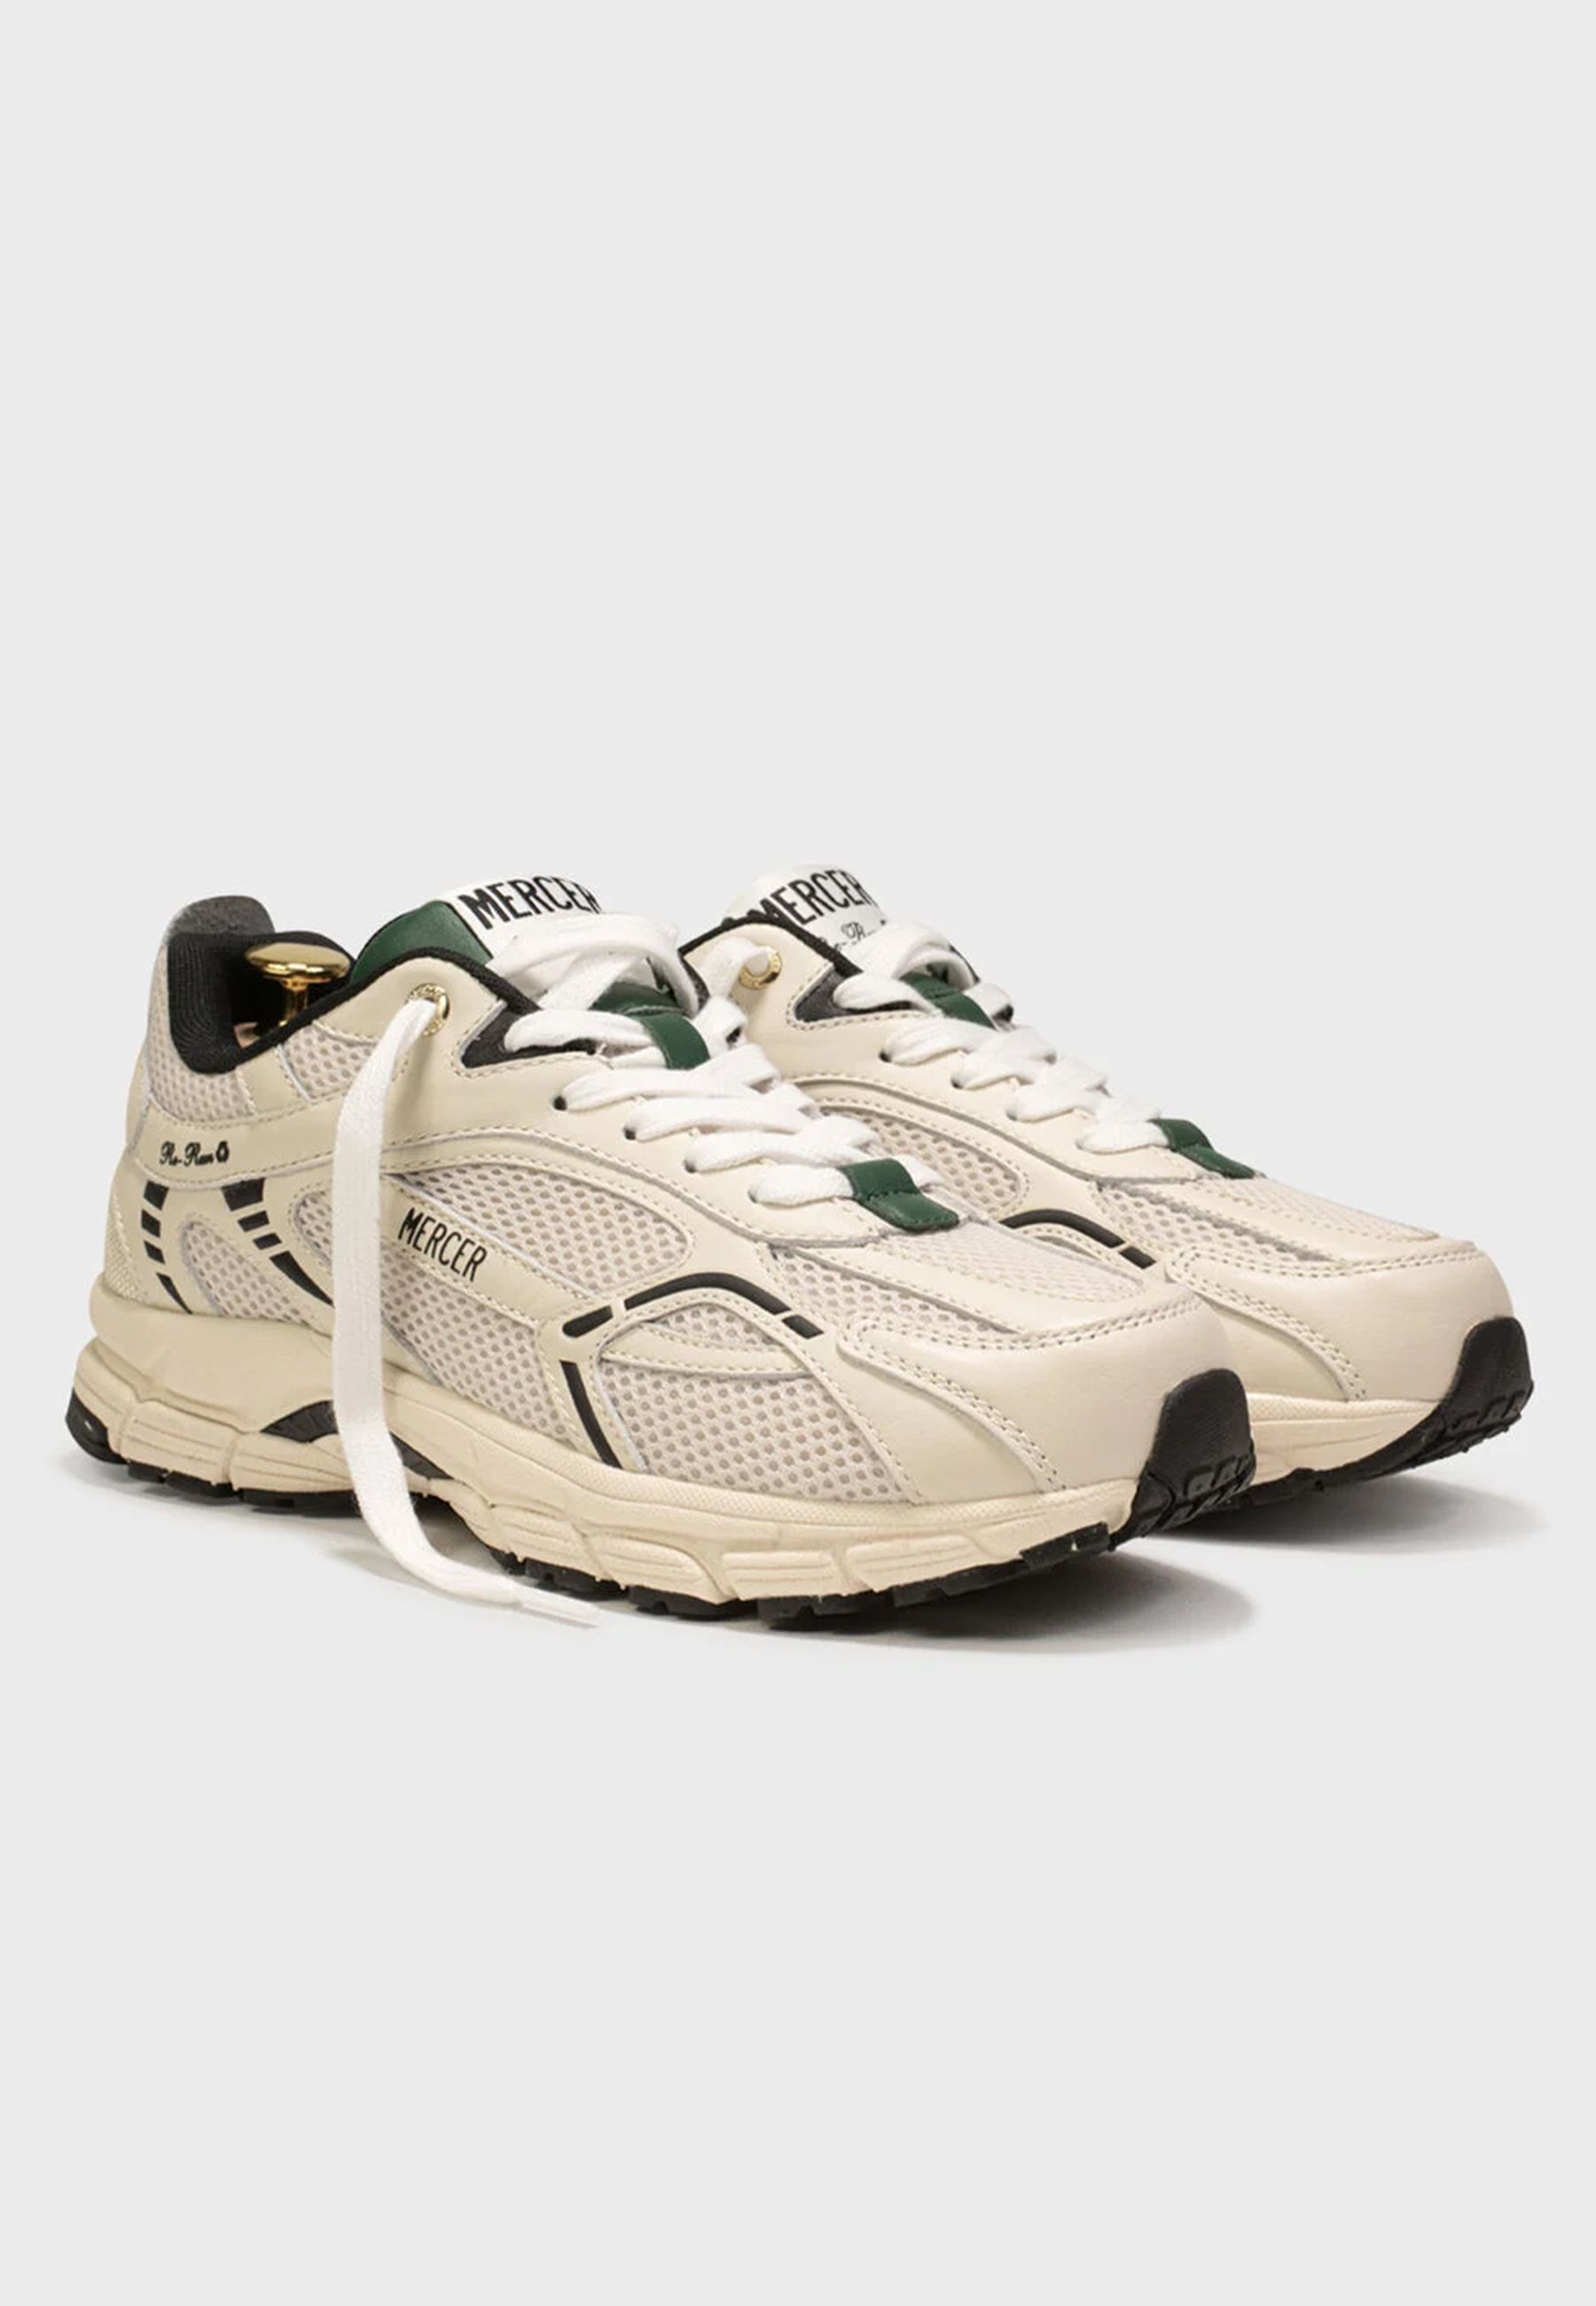 The re-run sneakers off white